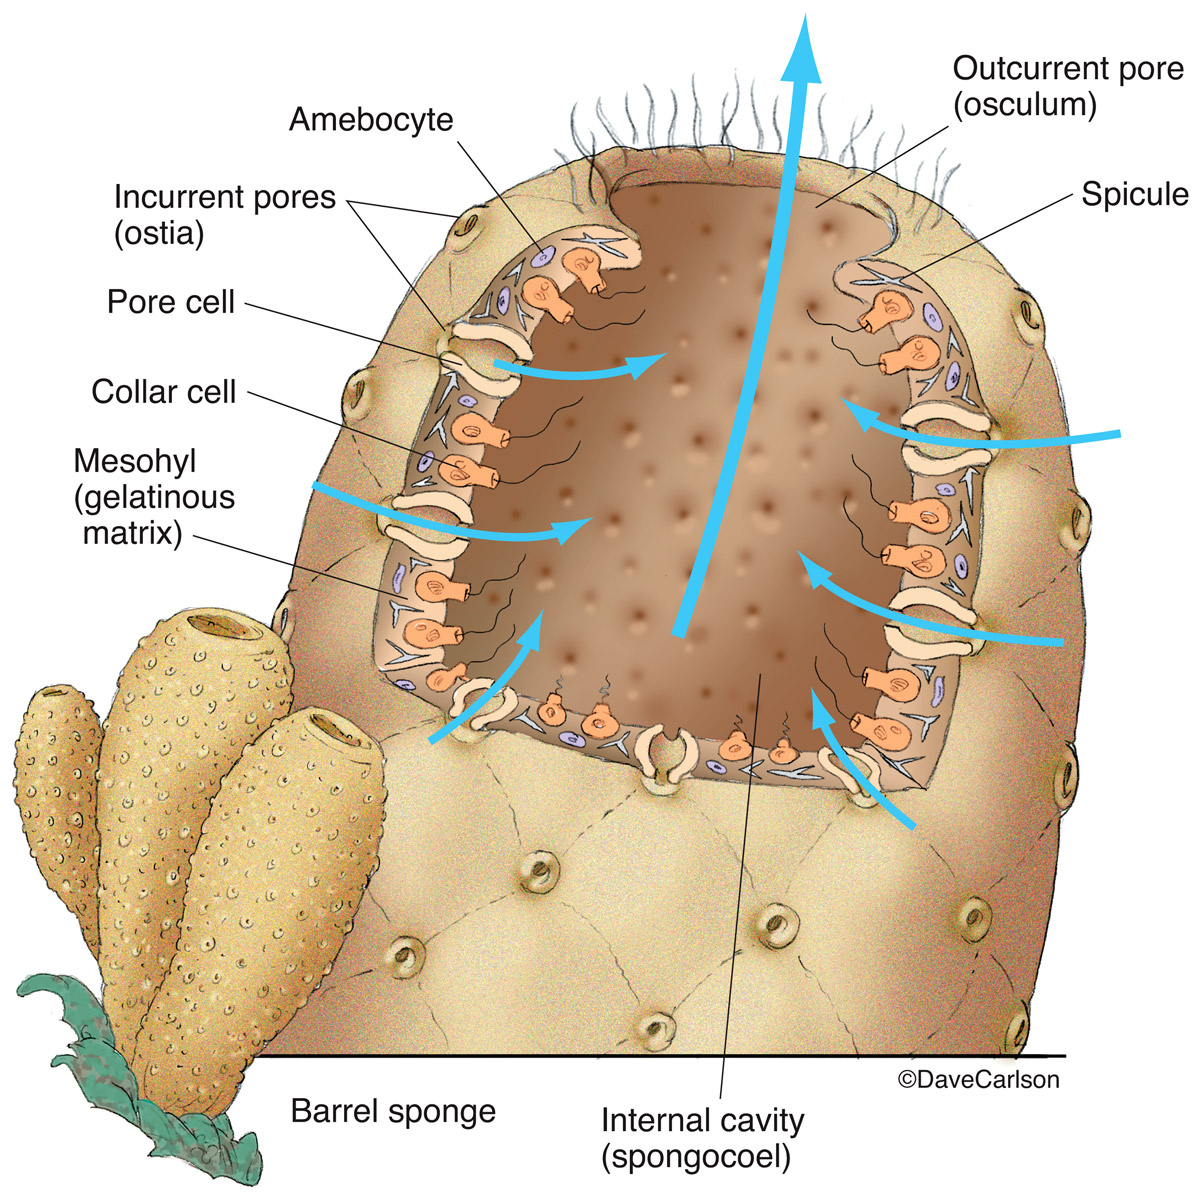 Illustration of the structure and anatomy of a typical sponge (barrel sponge, phylum porifera).